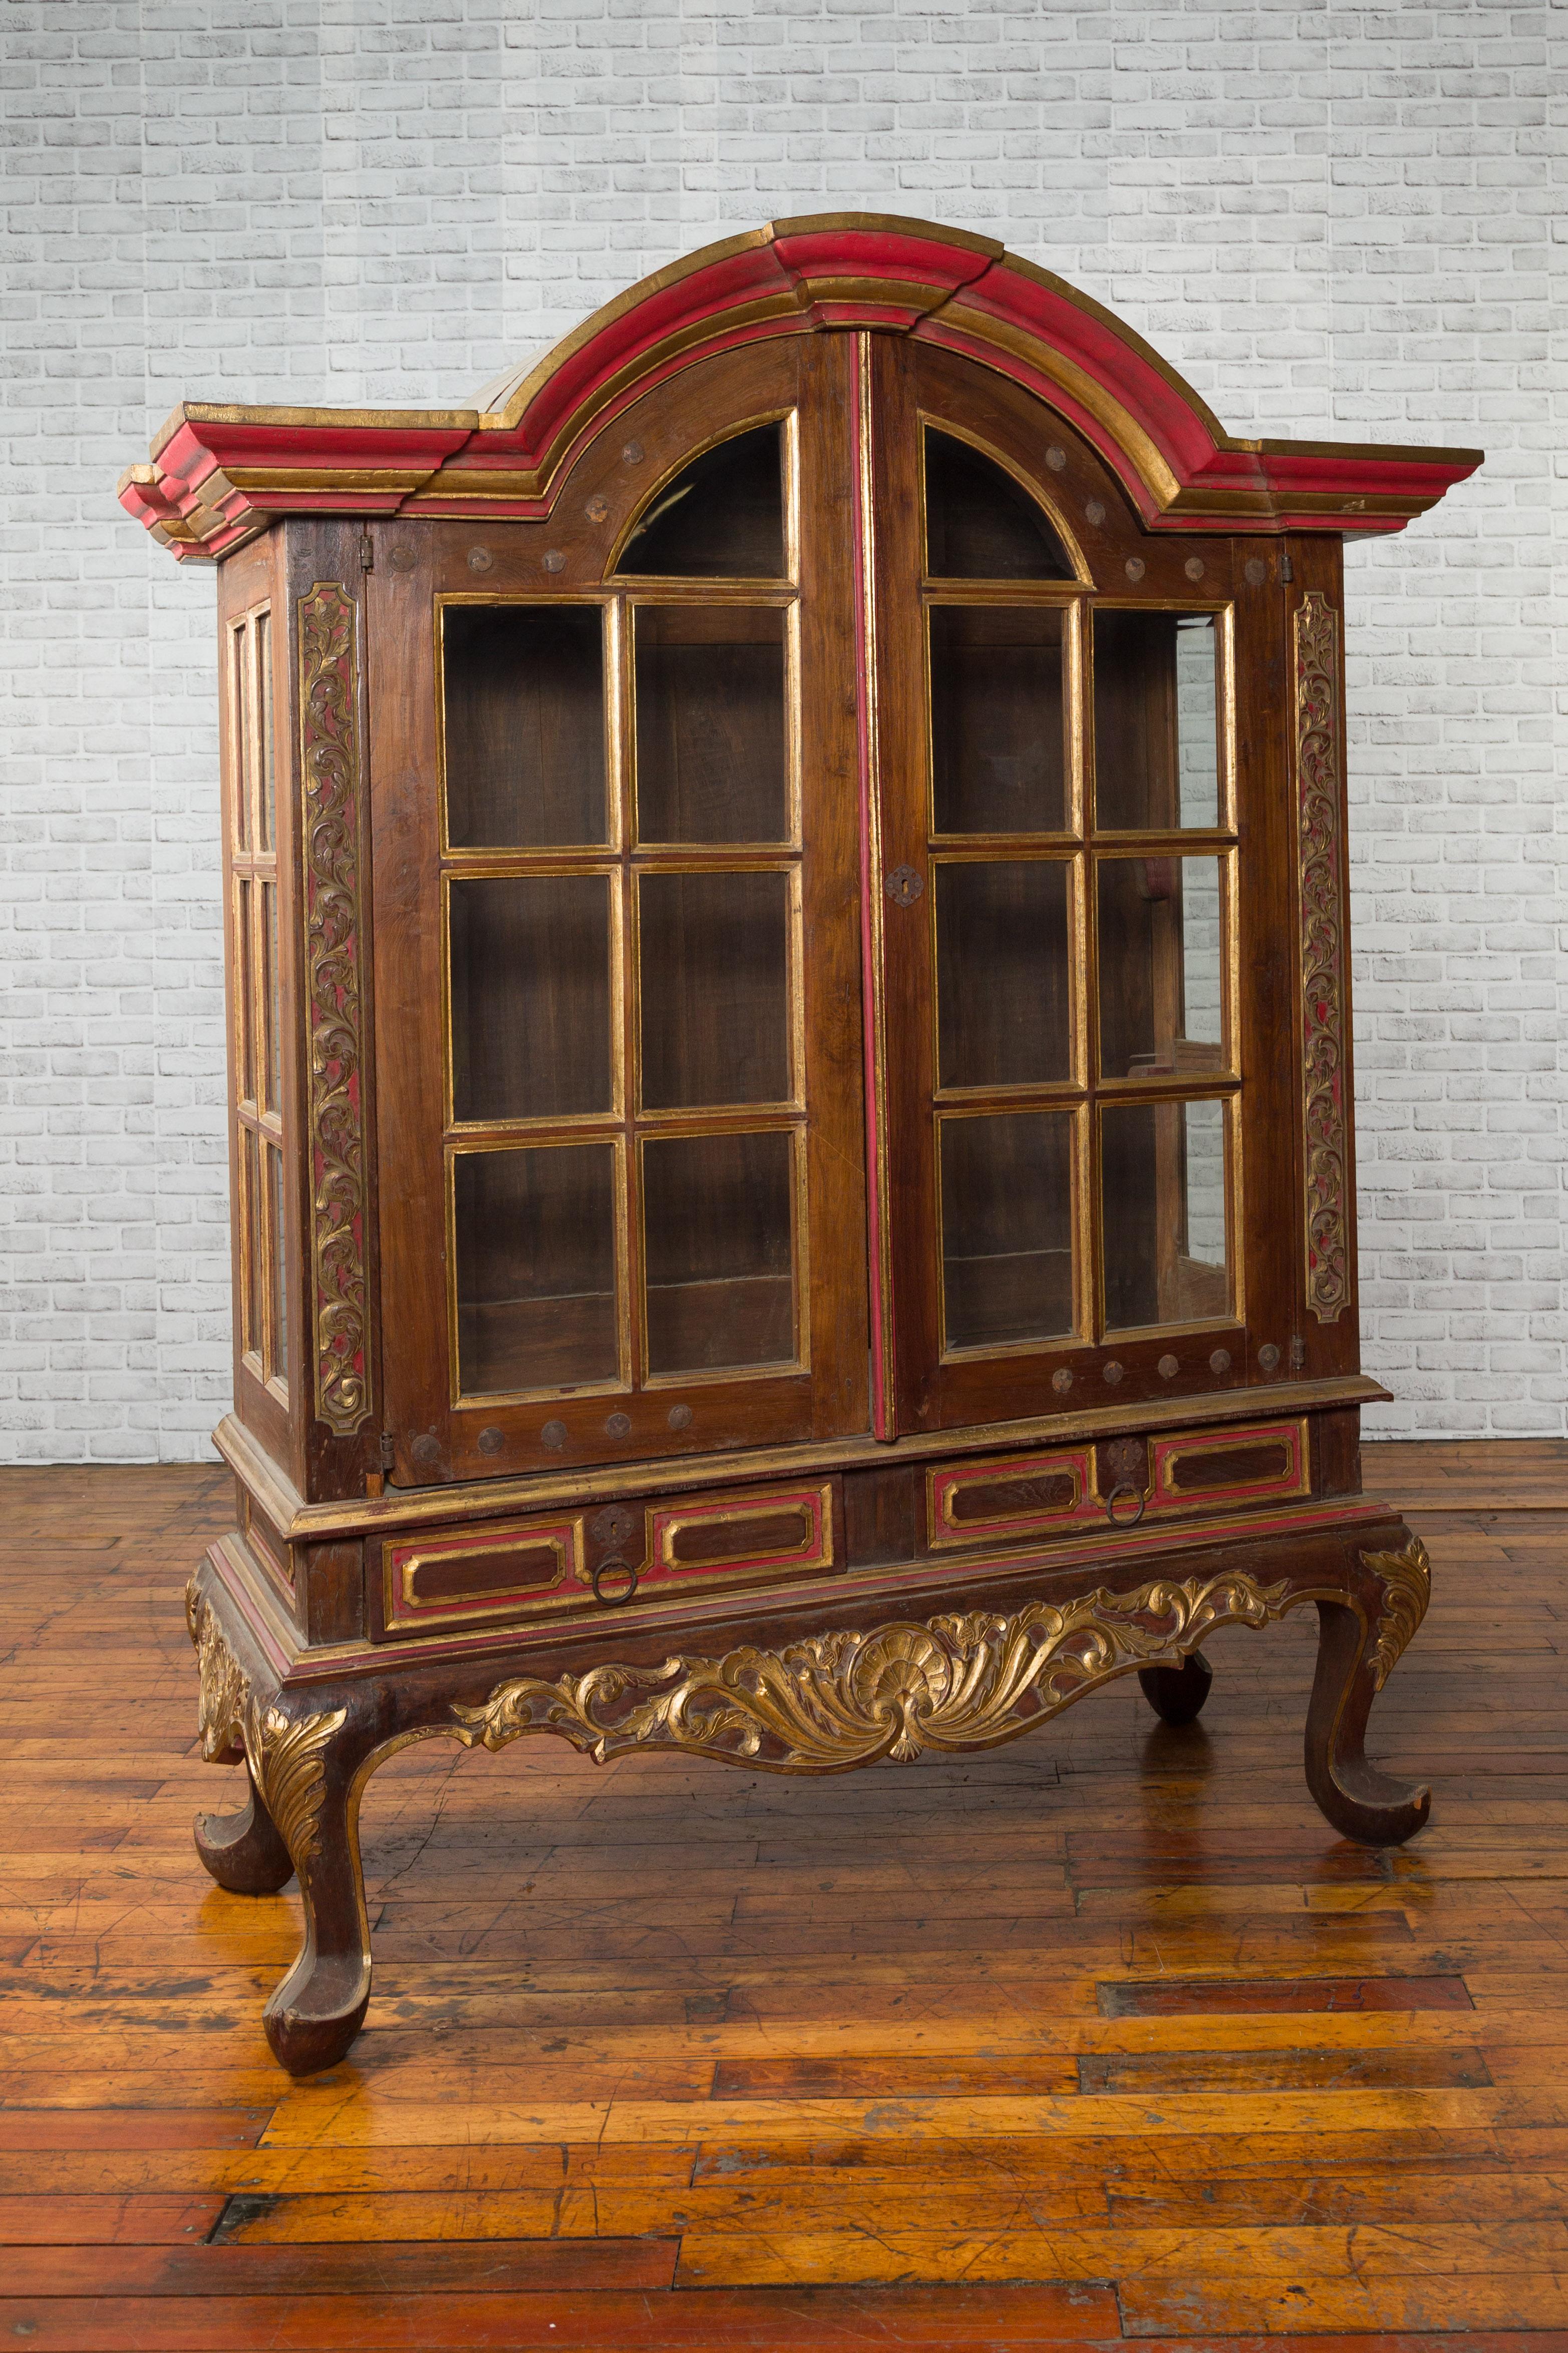 Indonesian Dutch Colonial Early 20th Century Bonnet Top Gilded Cabinet with Glass Doors For Sale